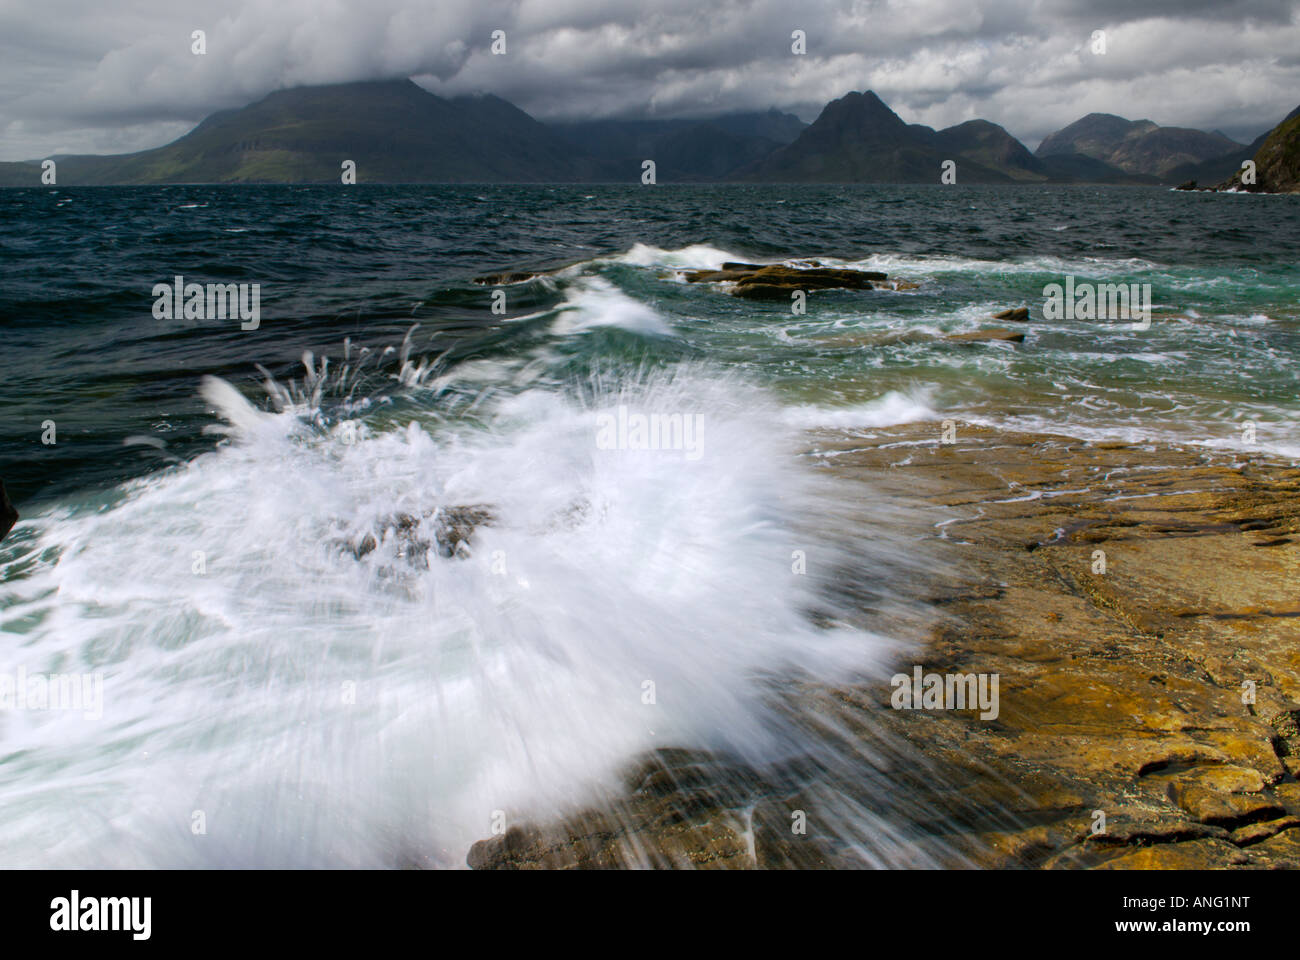 Waves Sea Surf Breaking On The Shoreline The Cuilin Mountains In Distance, Elgol Beach The 'Isle Of Skye' Scotland UK Stock Photo